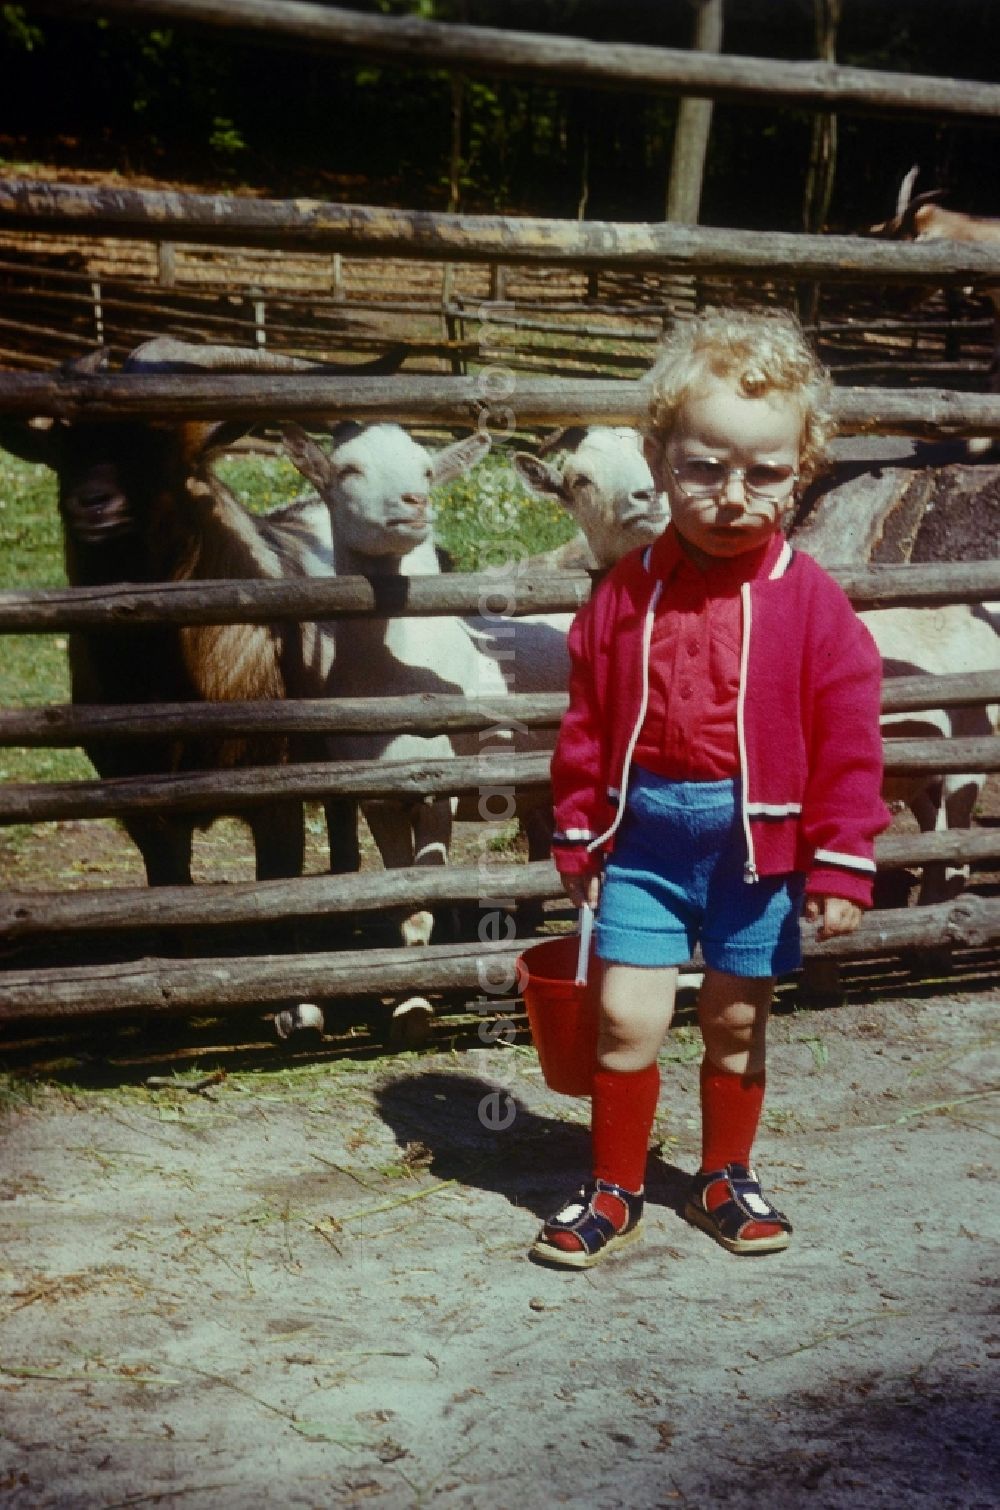 GDR photo archive: Neustrelitz - A small child with red knee socks, locks, glasses and a bottle bucket in the animal park before the enclosure of the goats in Neustrelitz in the federal state Mecklenburg-West Pomerania in the area of the former GDR, German democratic republic